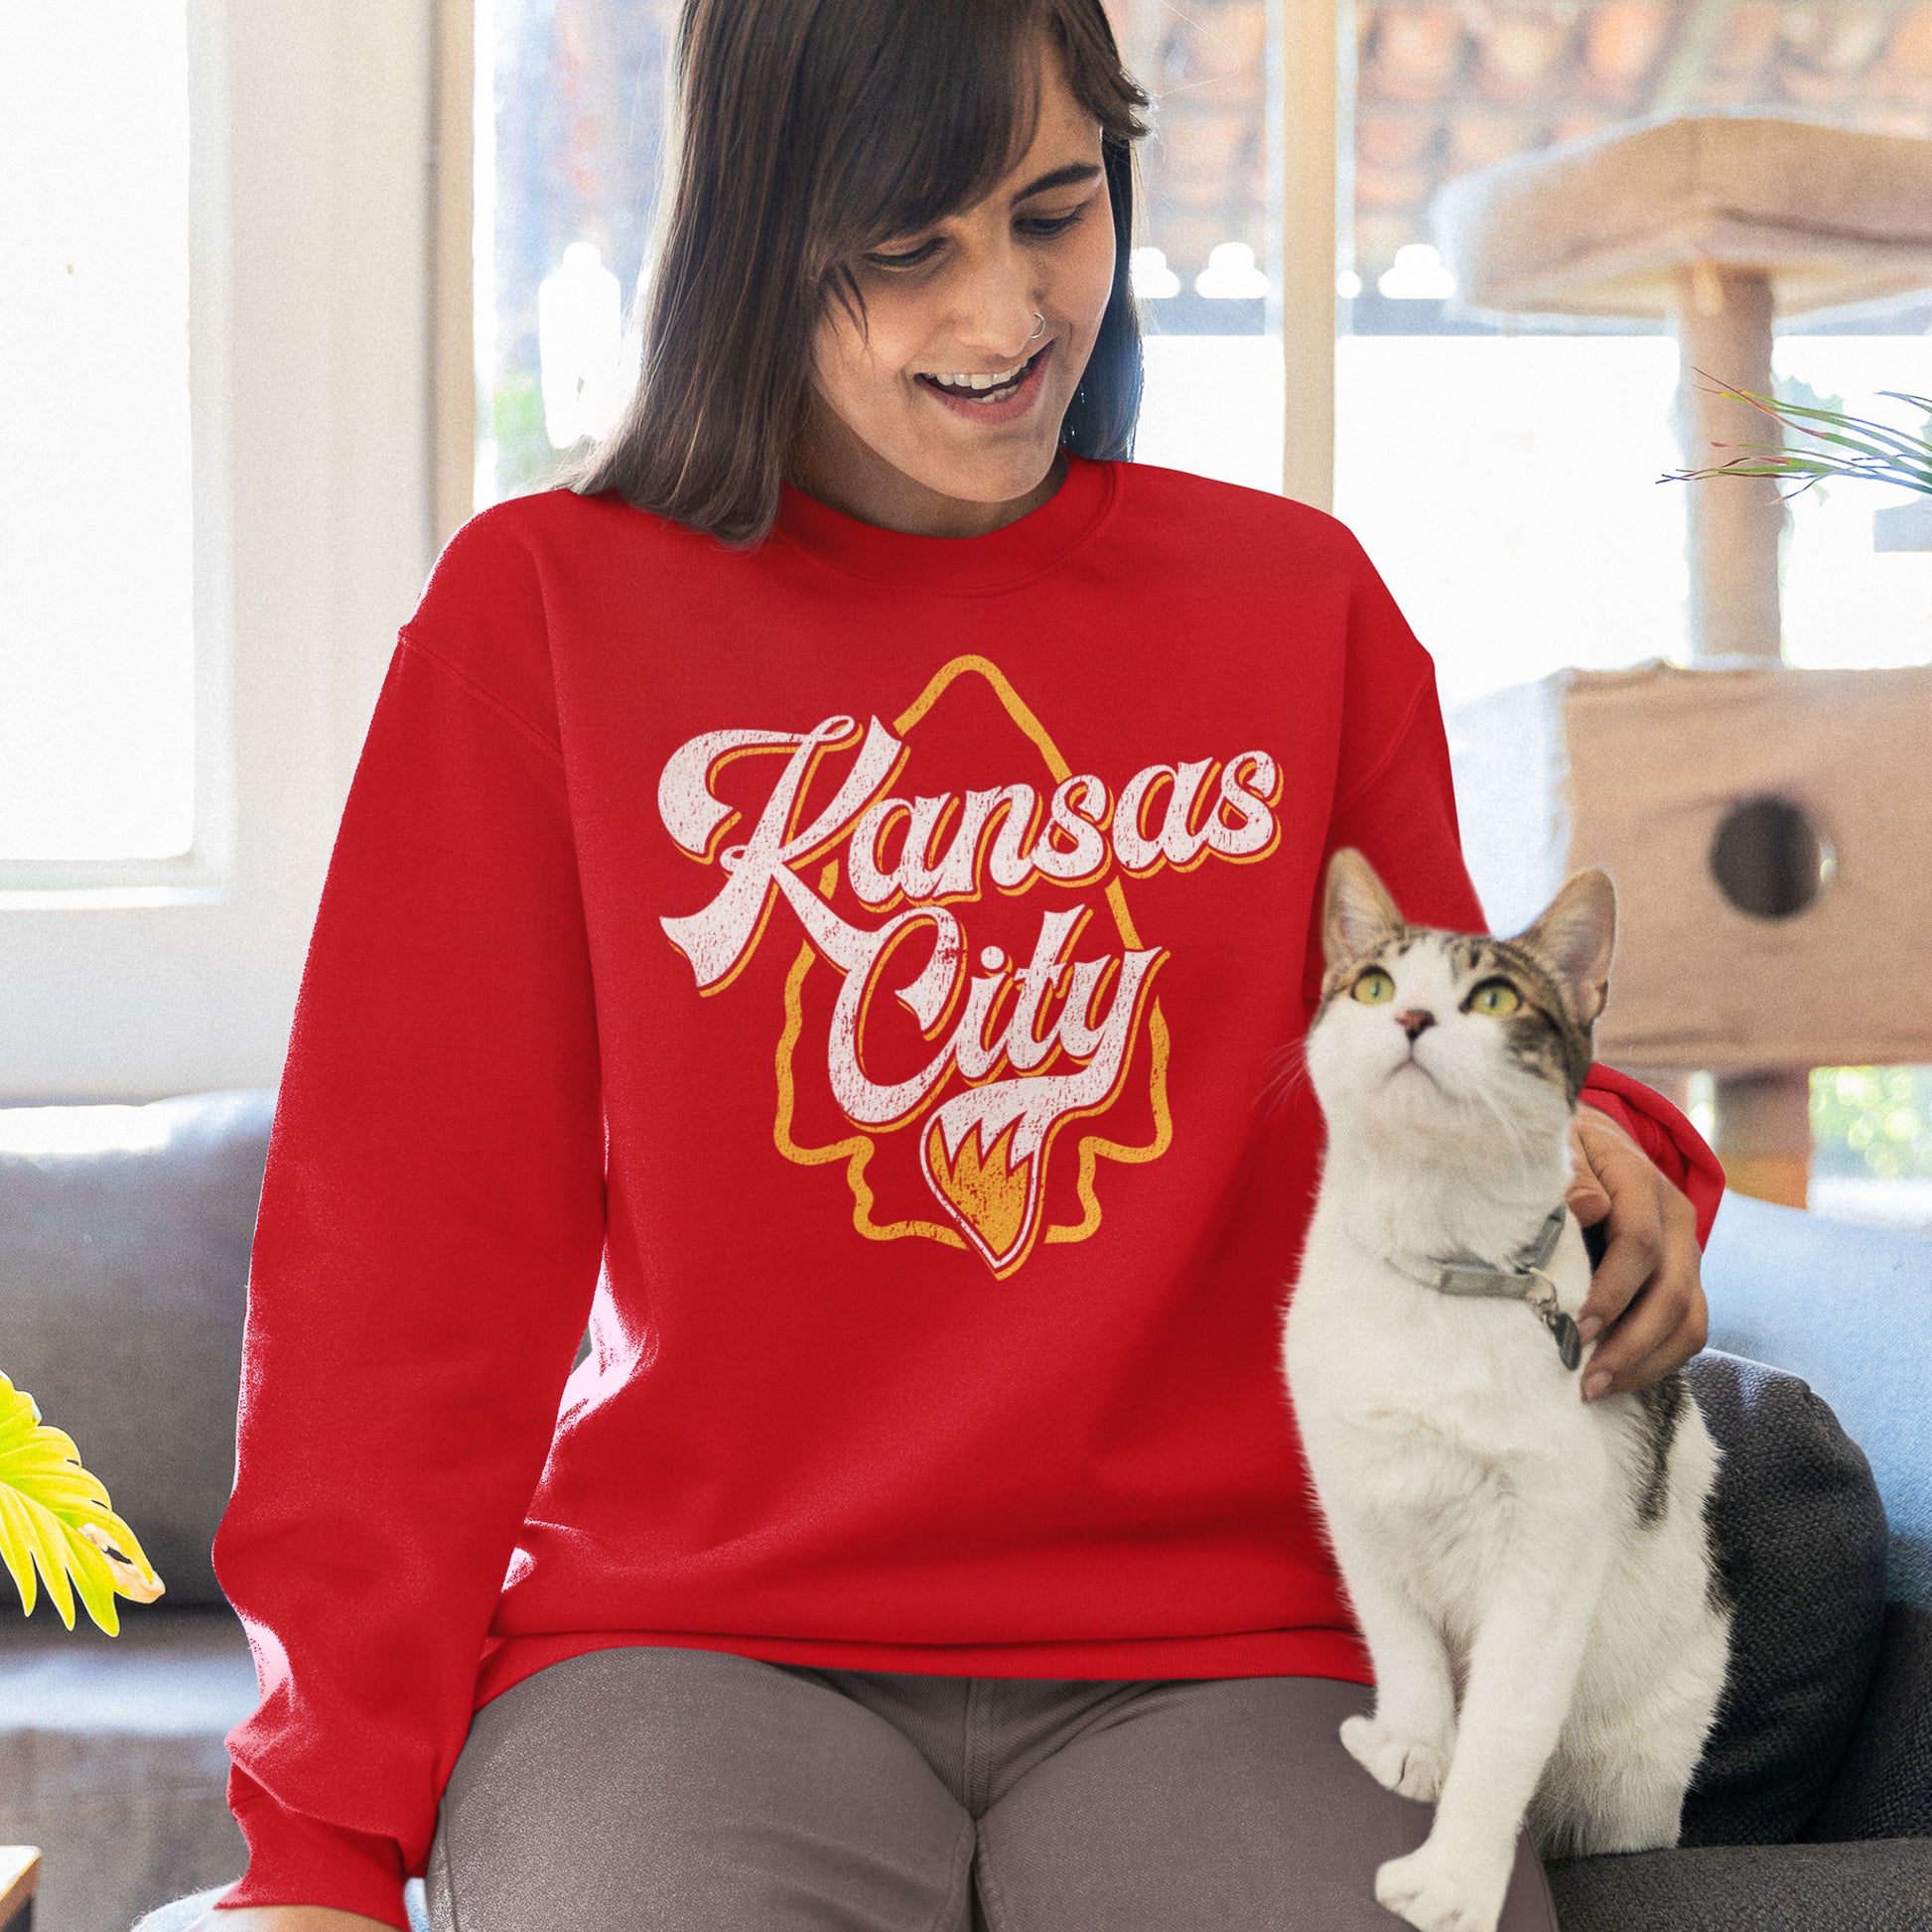 KC Swag Kansas City Chiefs Distressed White & Gold Wolftail KC on a Red Crewneck Sweatshirt worn by a female model sitting on a couch petting a cat